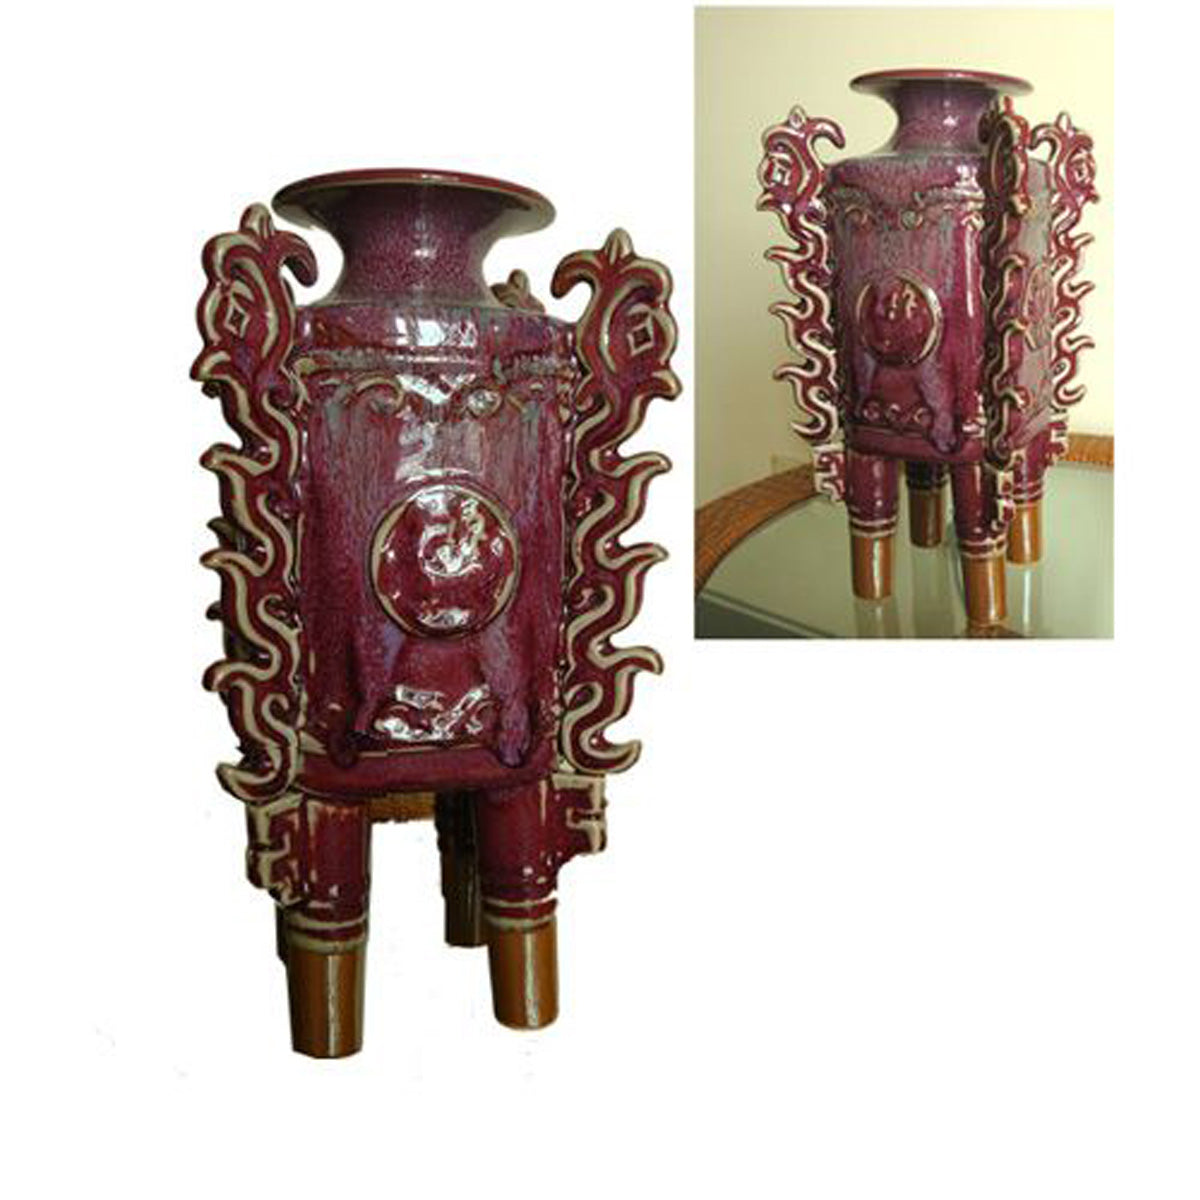 Fire Sale! Chun Porcelain Lucky Career Vase Fine Asian Antiques Style Home Decor Decorating Accent